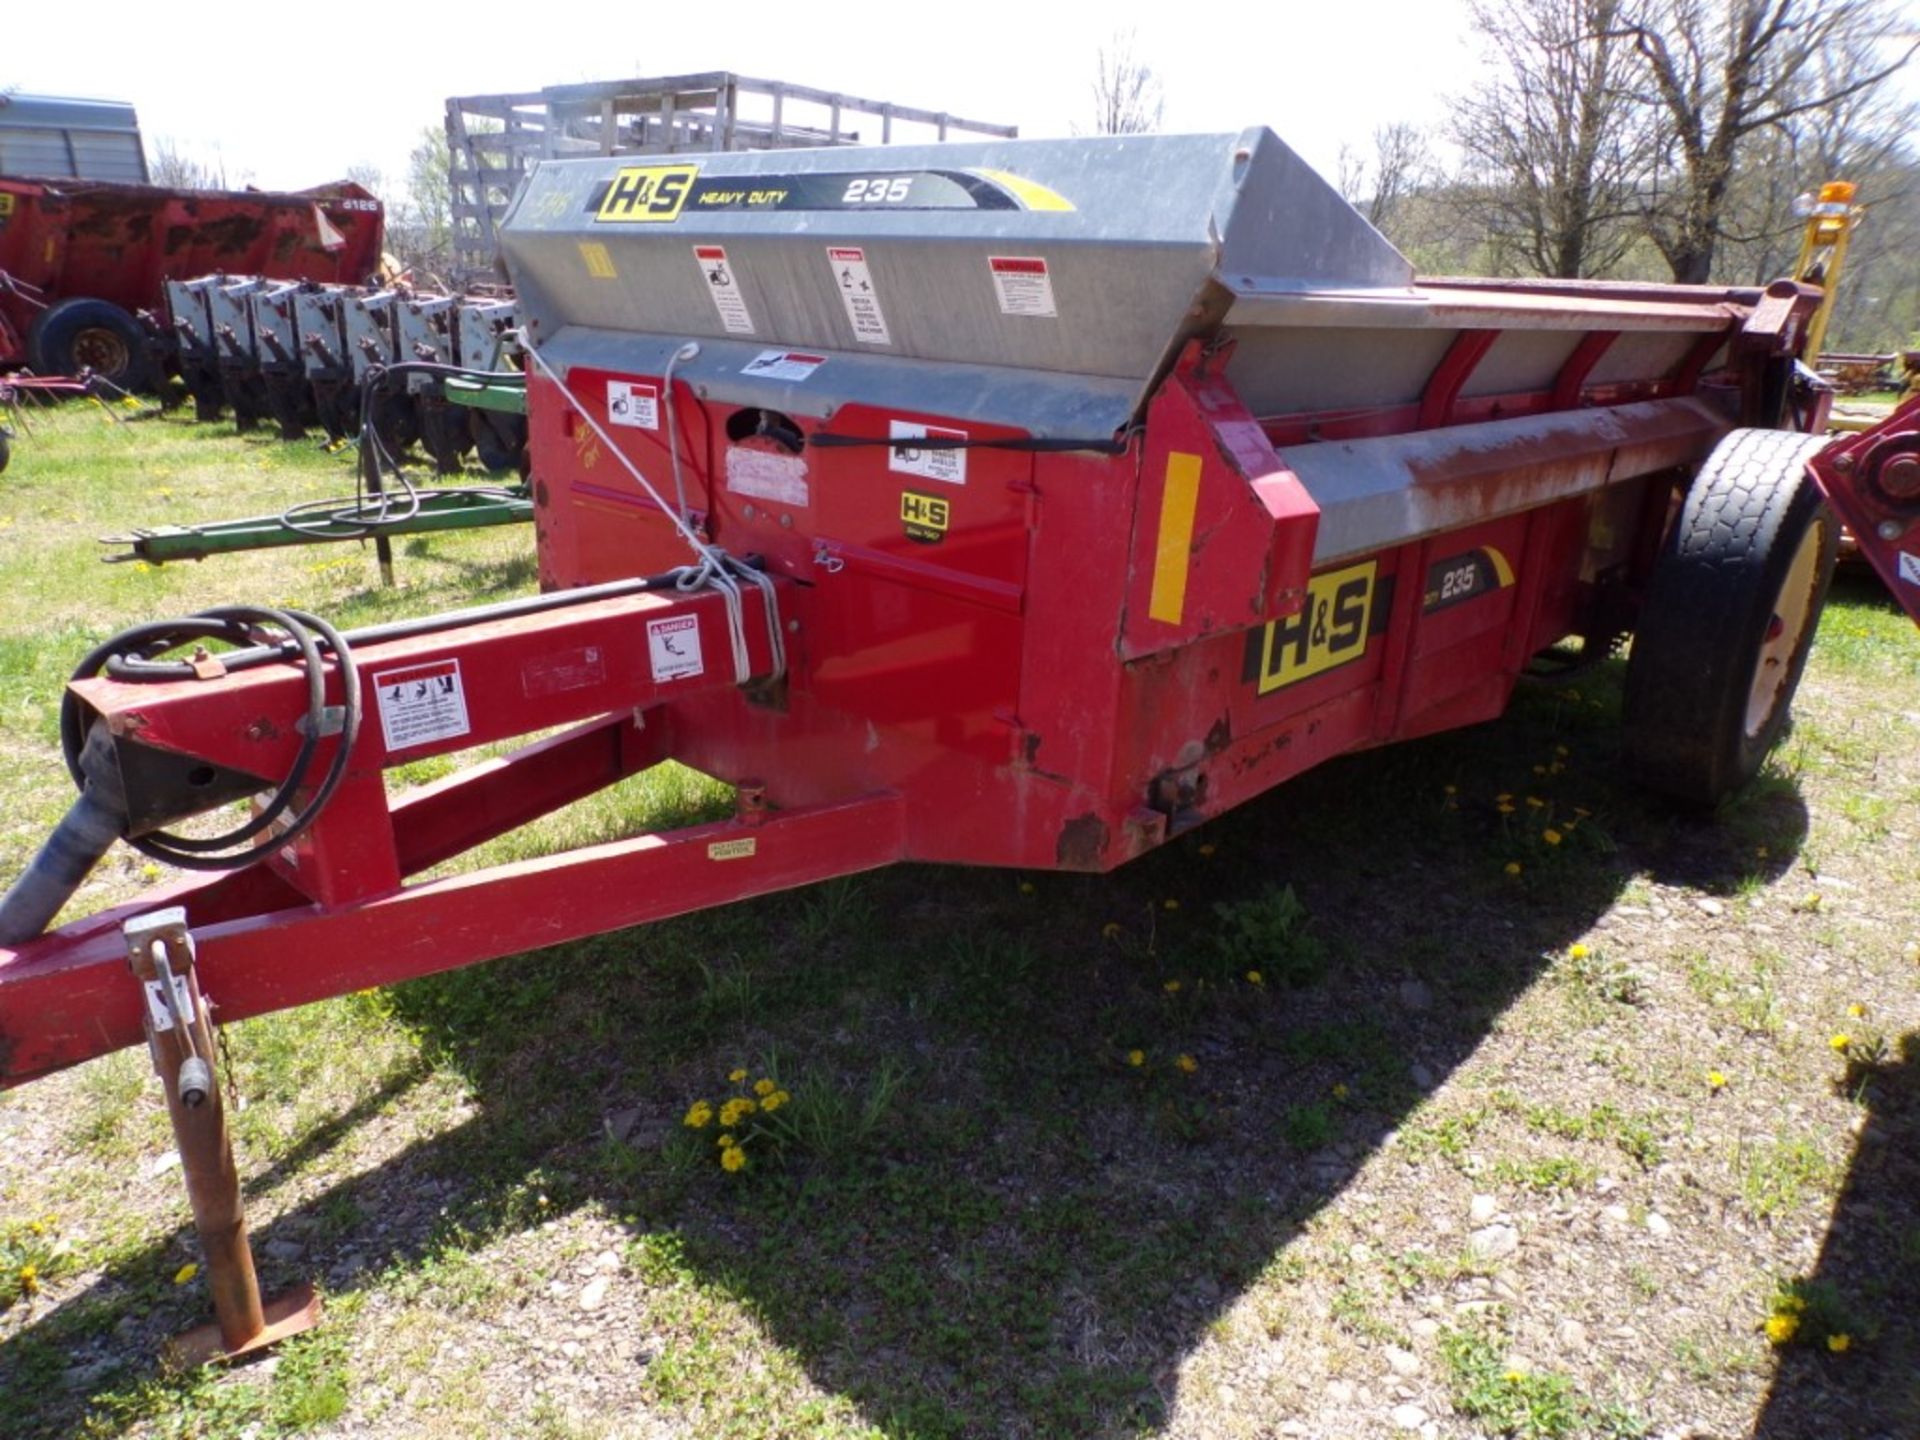 H&S 235 Manure Spreader w/ End Gate And Pan, Very Good Cond., S/N 213350 (4423) - Image 2 of 4